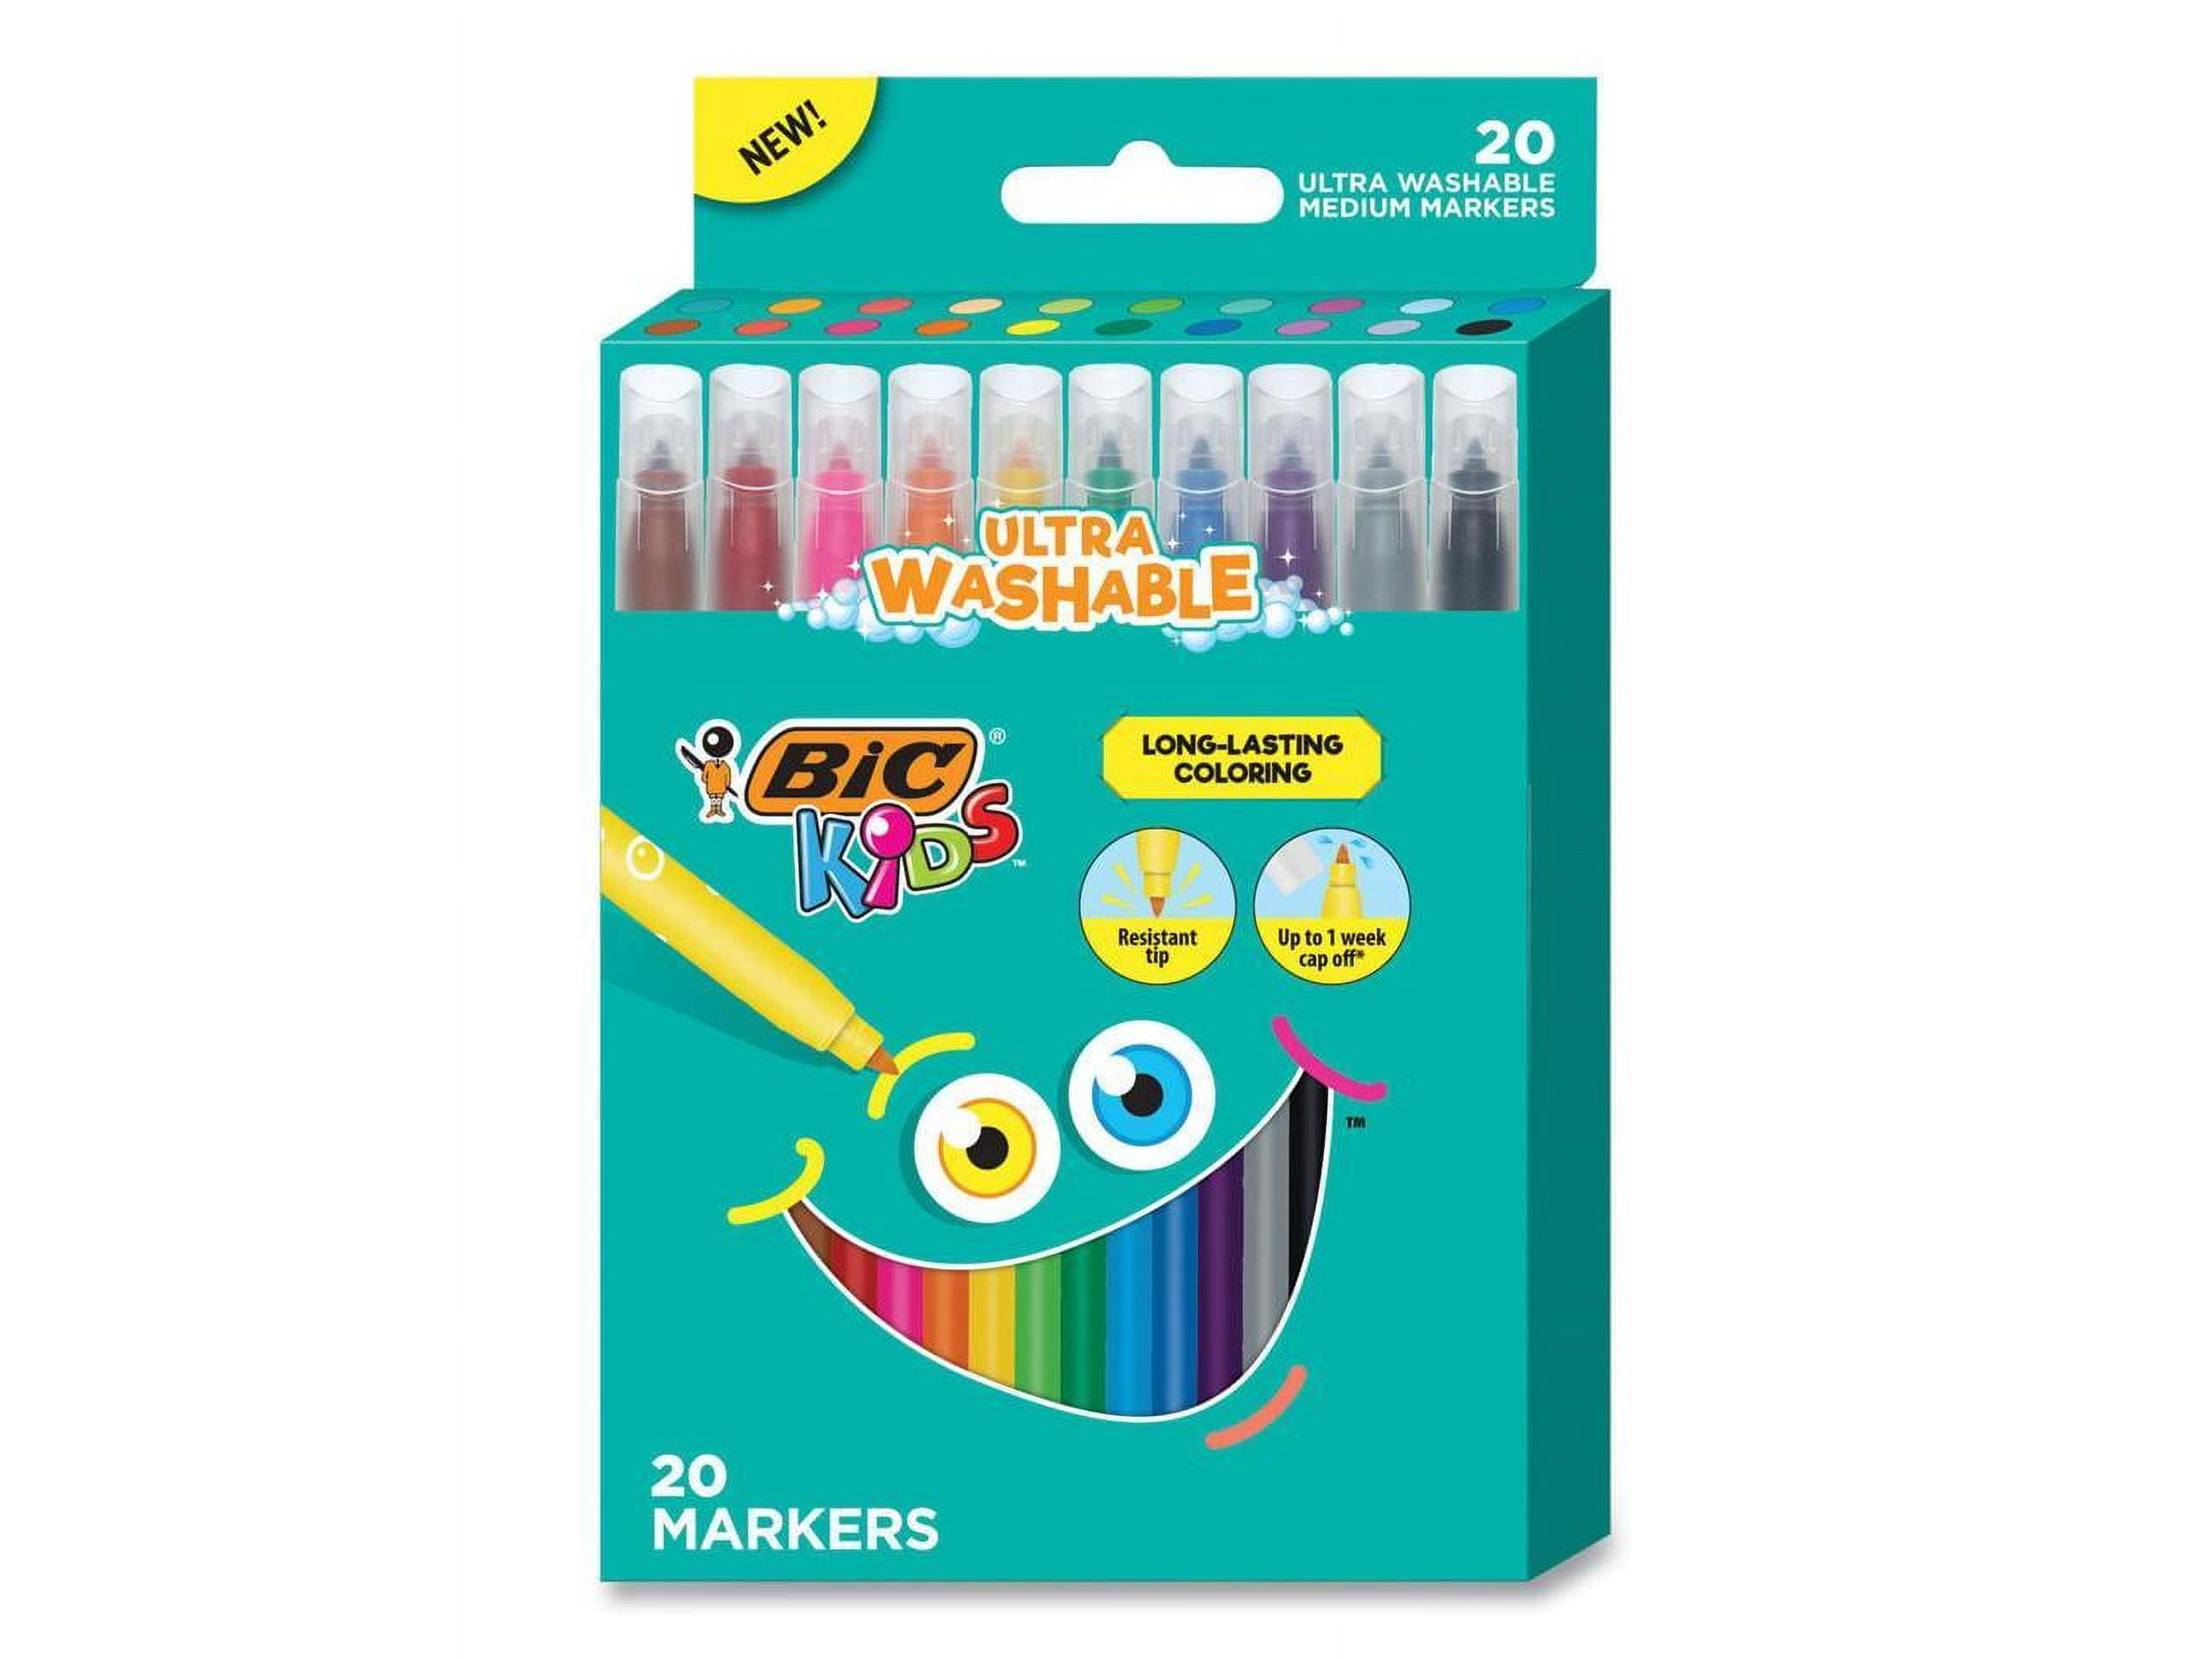 Crayola Pip-Squeaks Skinnies Washable Markers (64ct), Mini Markers for Kids,  Coloring Markers, Craft Supplies, Kids Holiday Gift, 3+